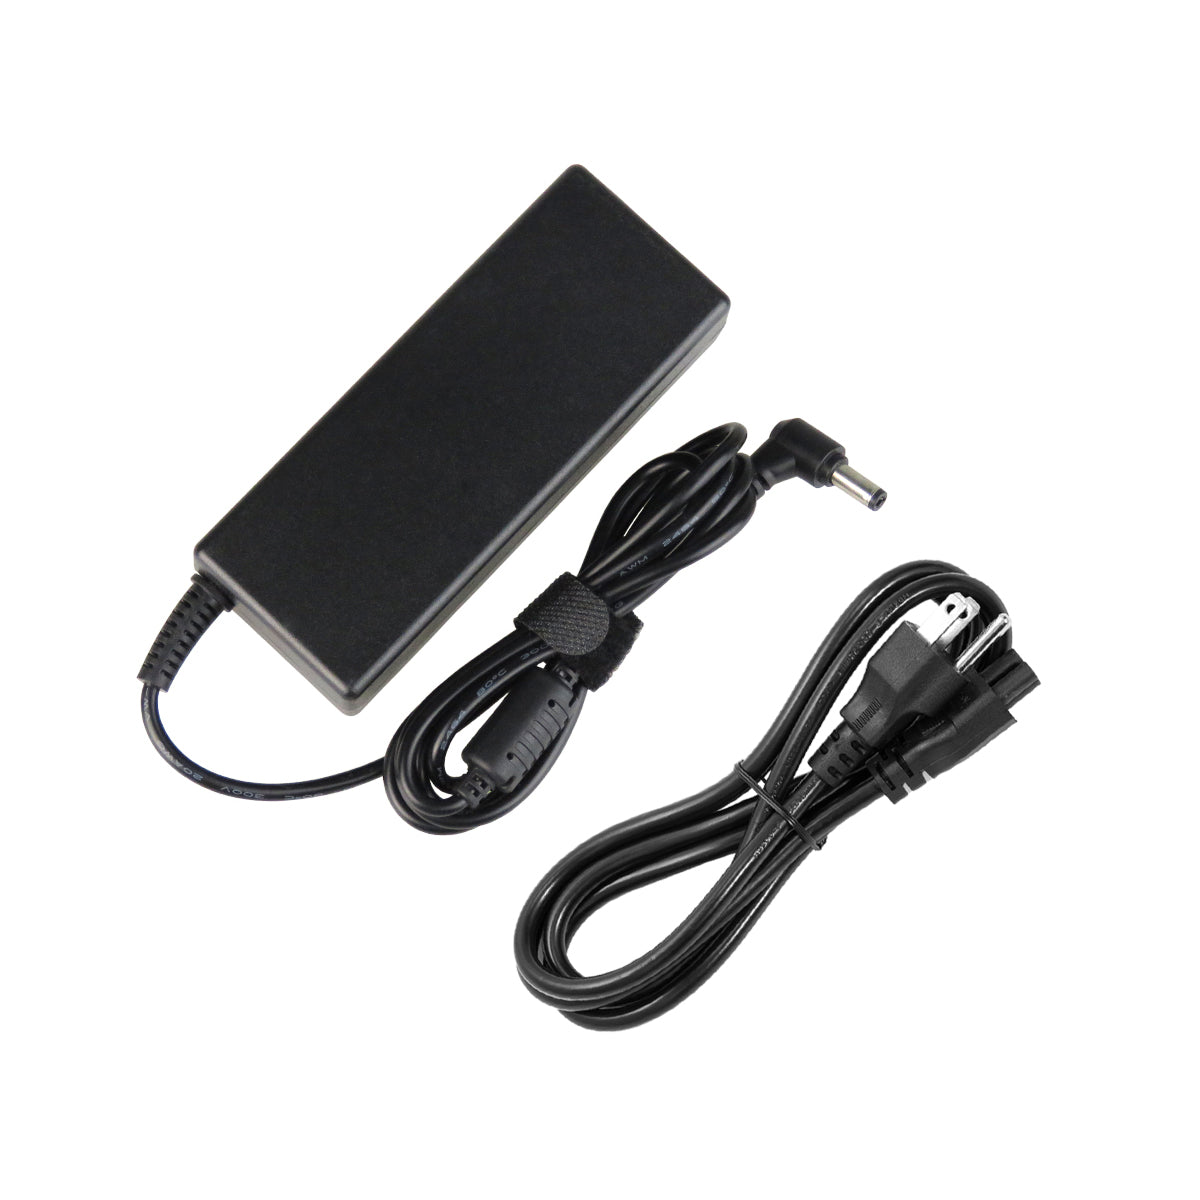 AC Adapter Charger for ASUS A54HY Notebook.